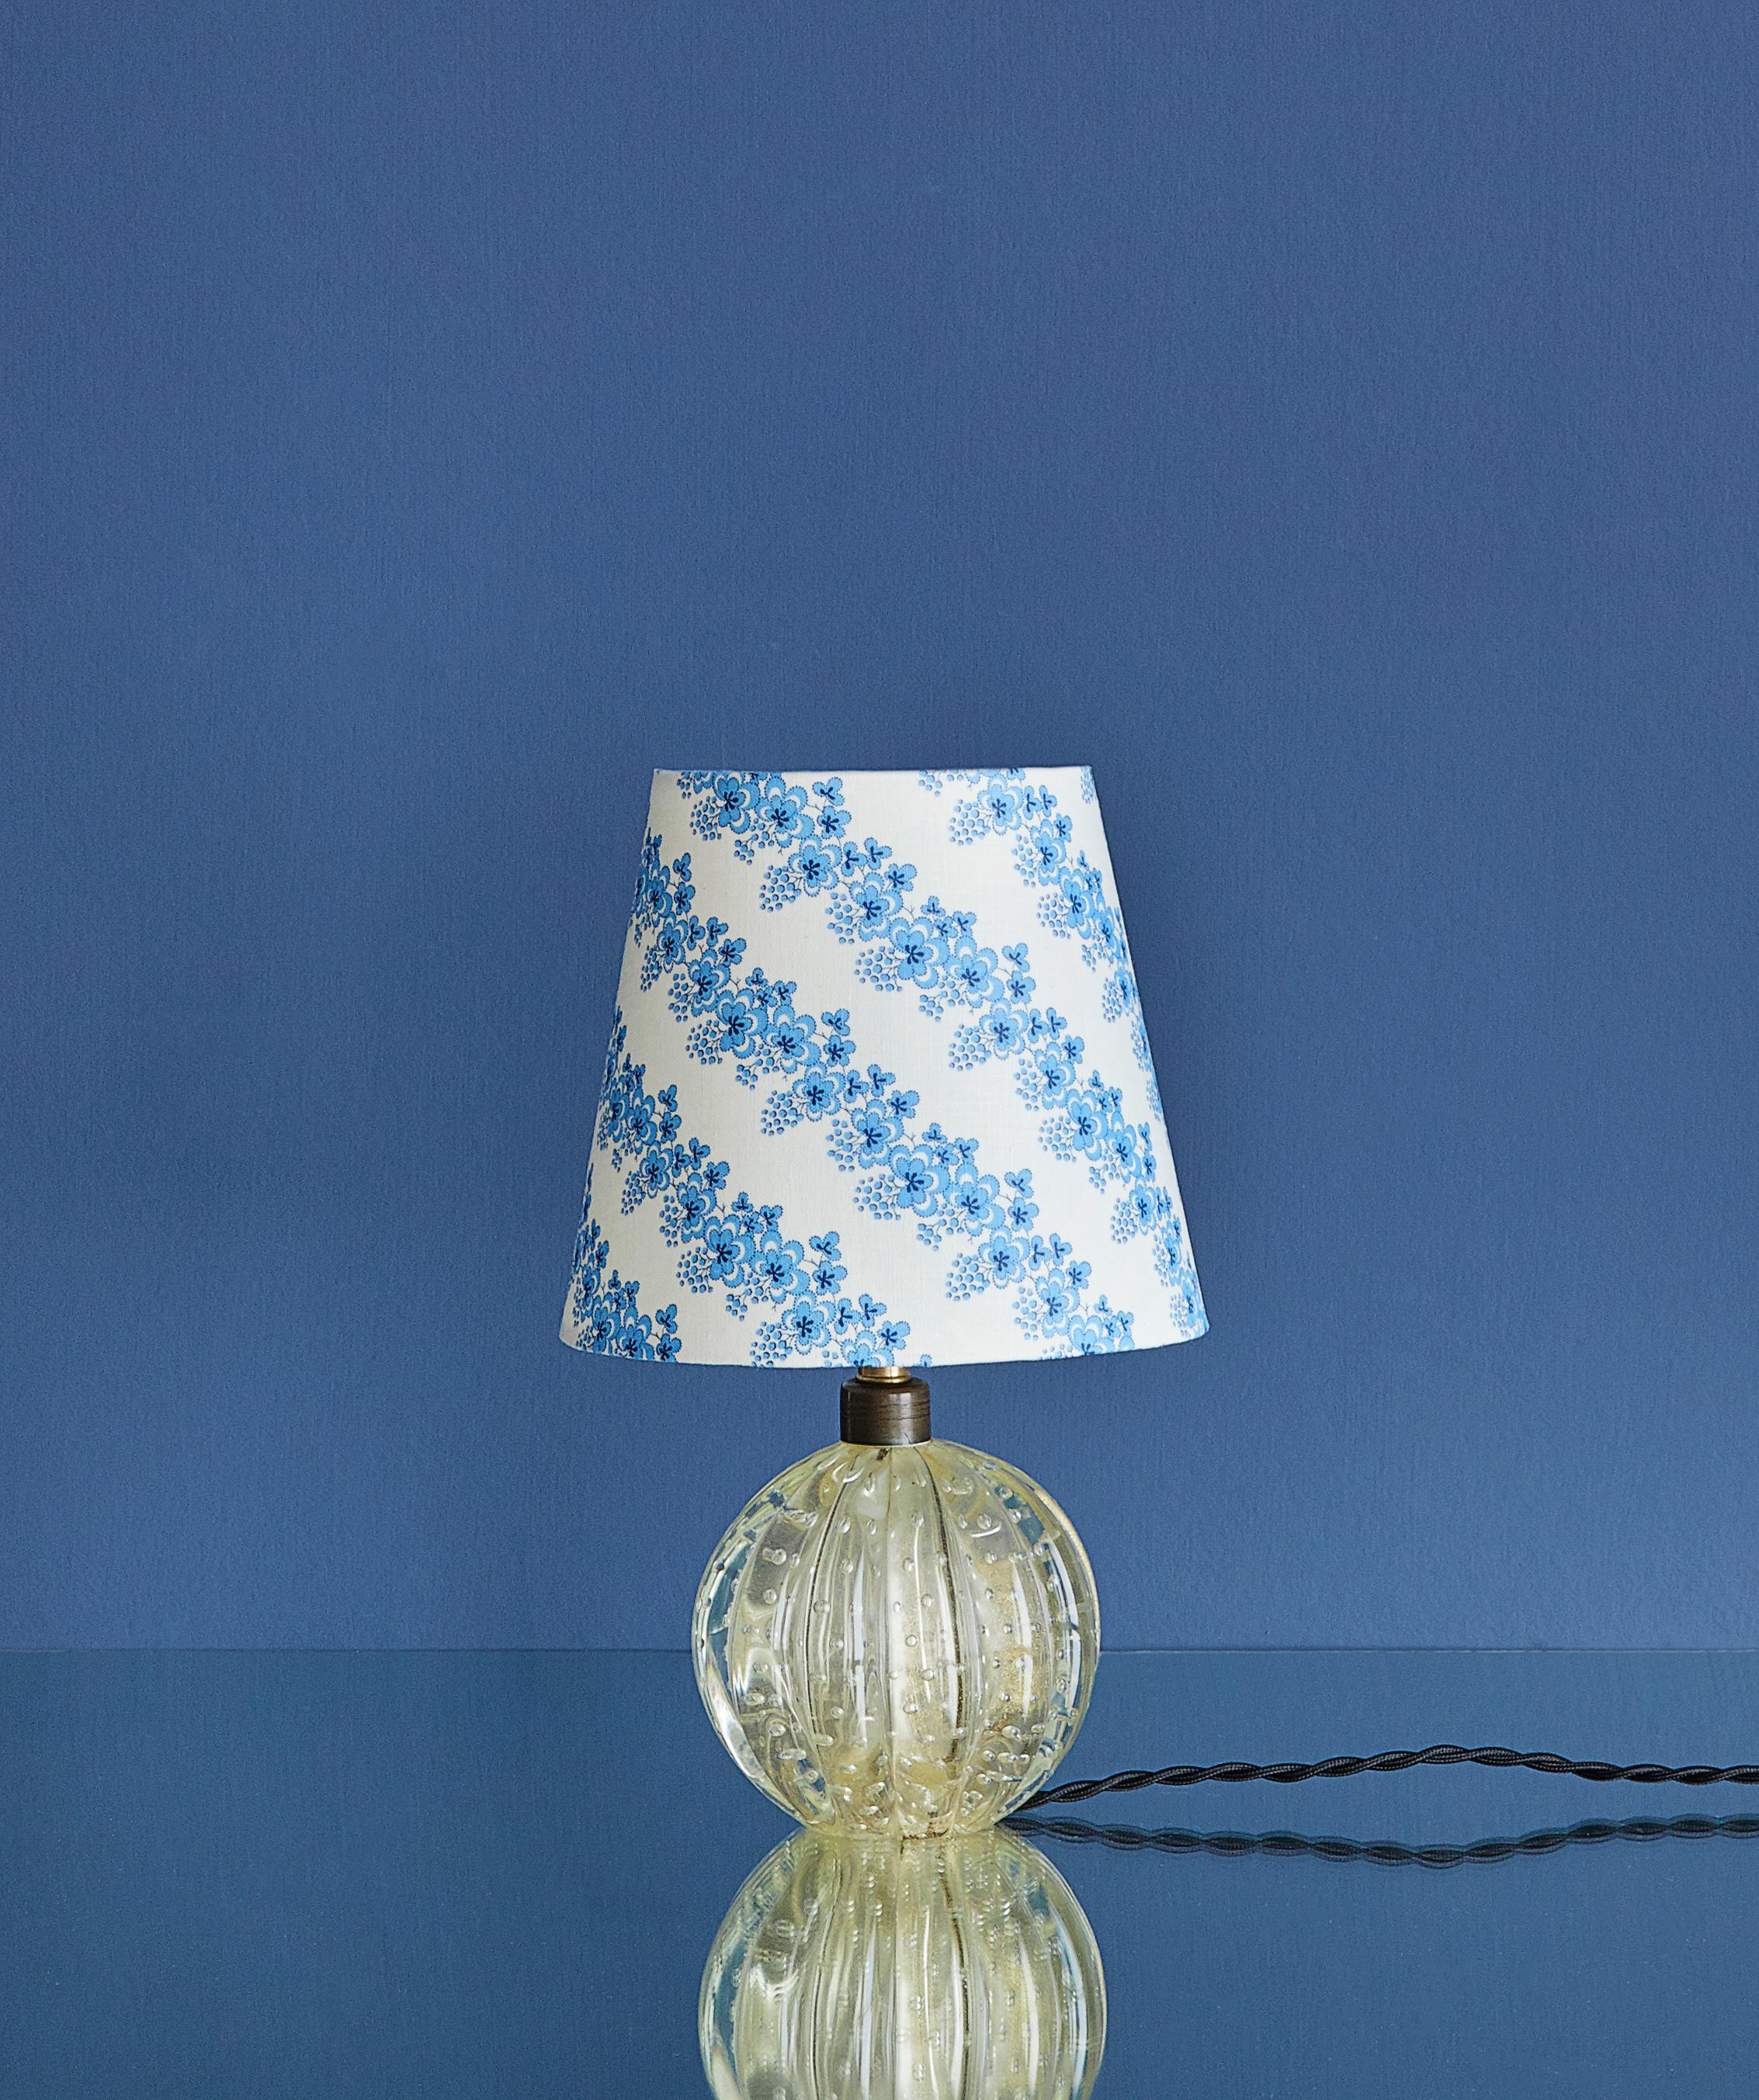 Lovely Murano table lamp in clear glass. New upholstered lamp shade with elegant blue floral pattern.
 
 